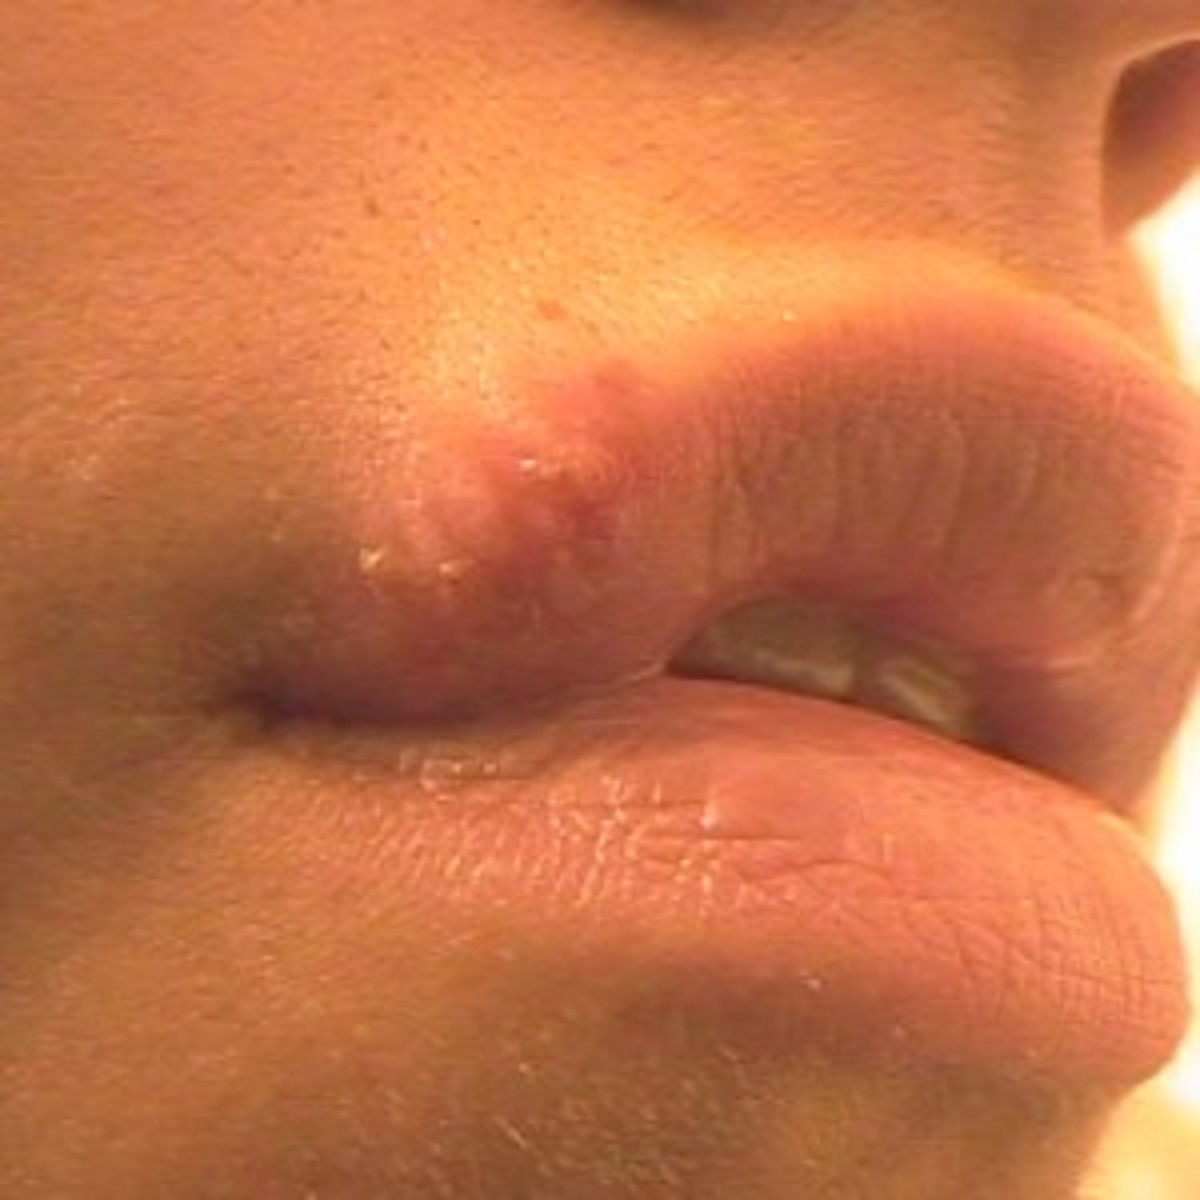 Get rid of cold sores faster by supplementing your diet.